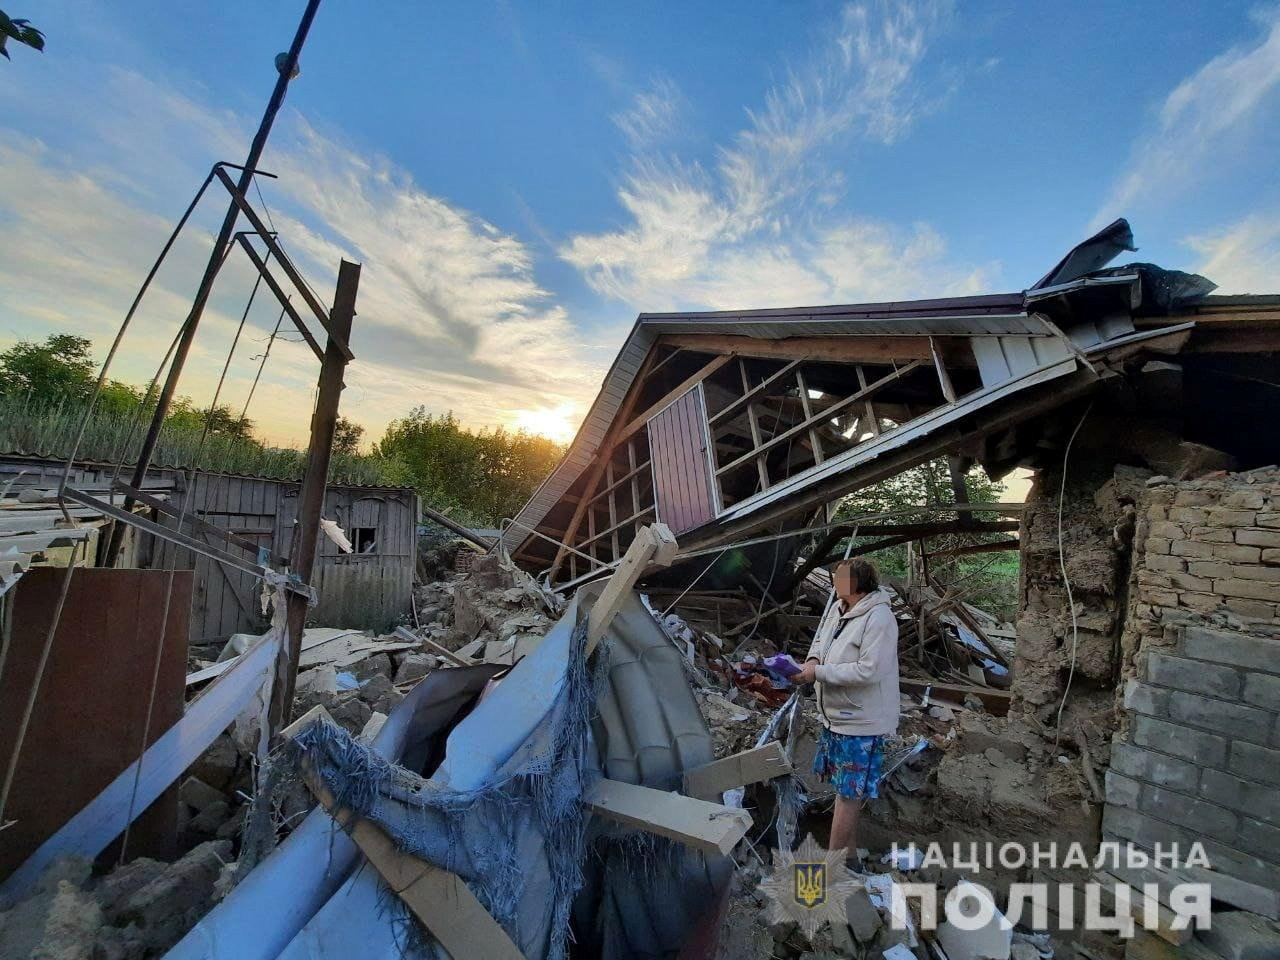 A local resident stands next to a house destroyed by a Russian military strike in location given as Marhanets town